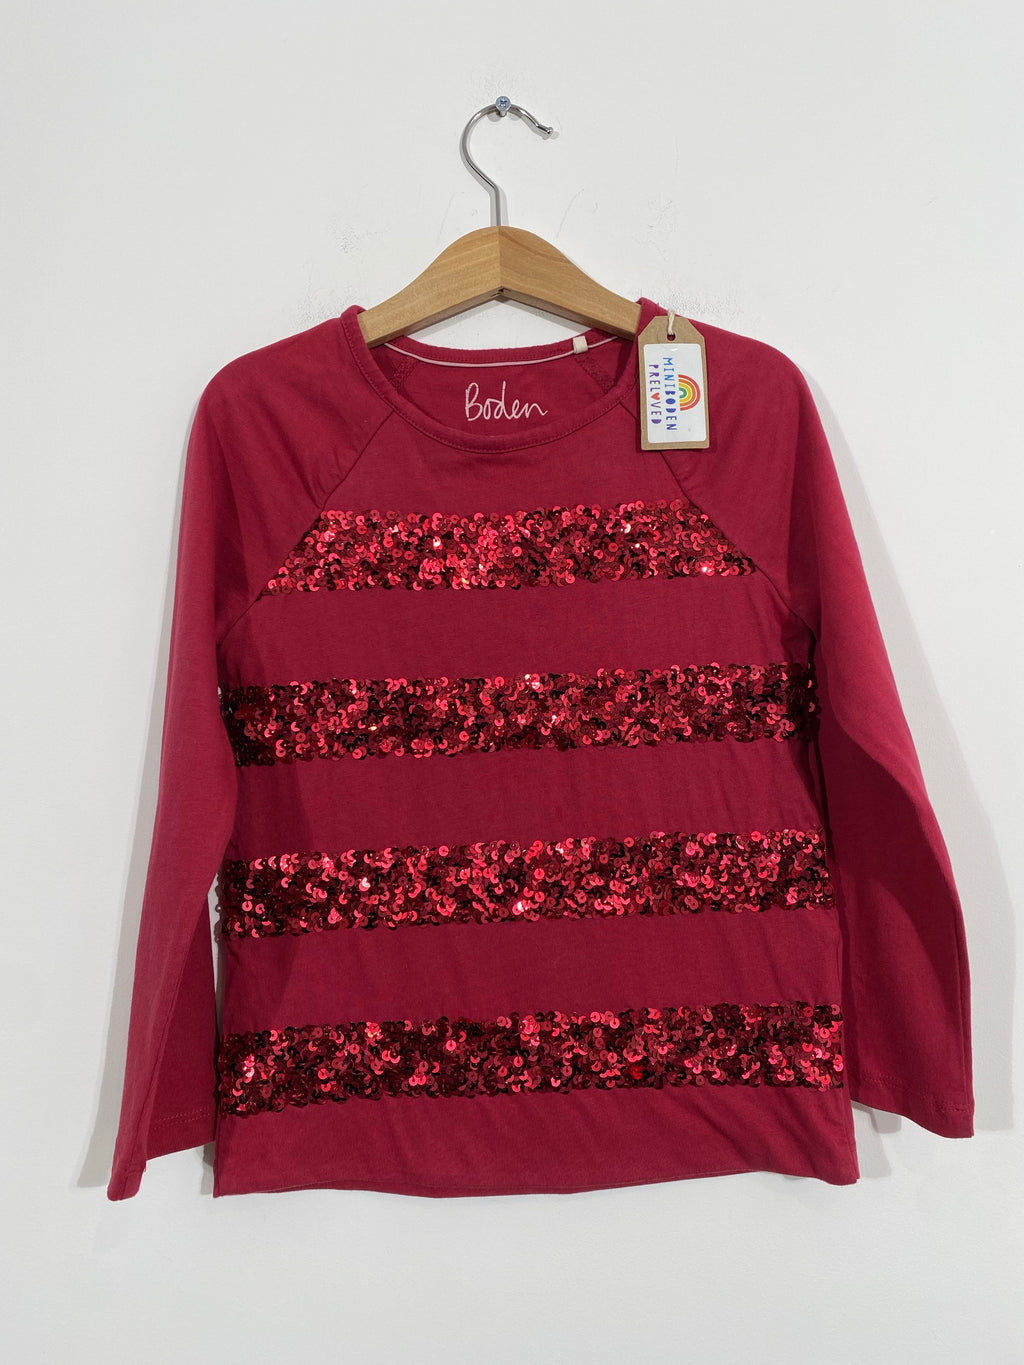 Fabulous Burgundy Sequin Party Top (5-6 Years)